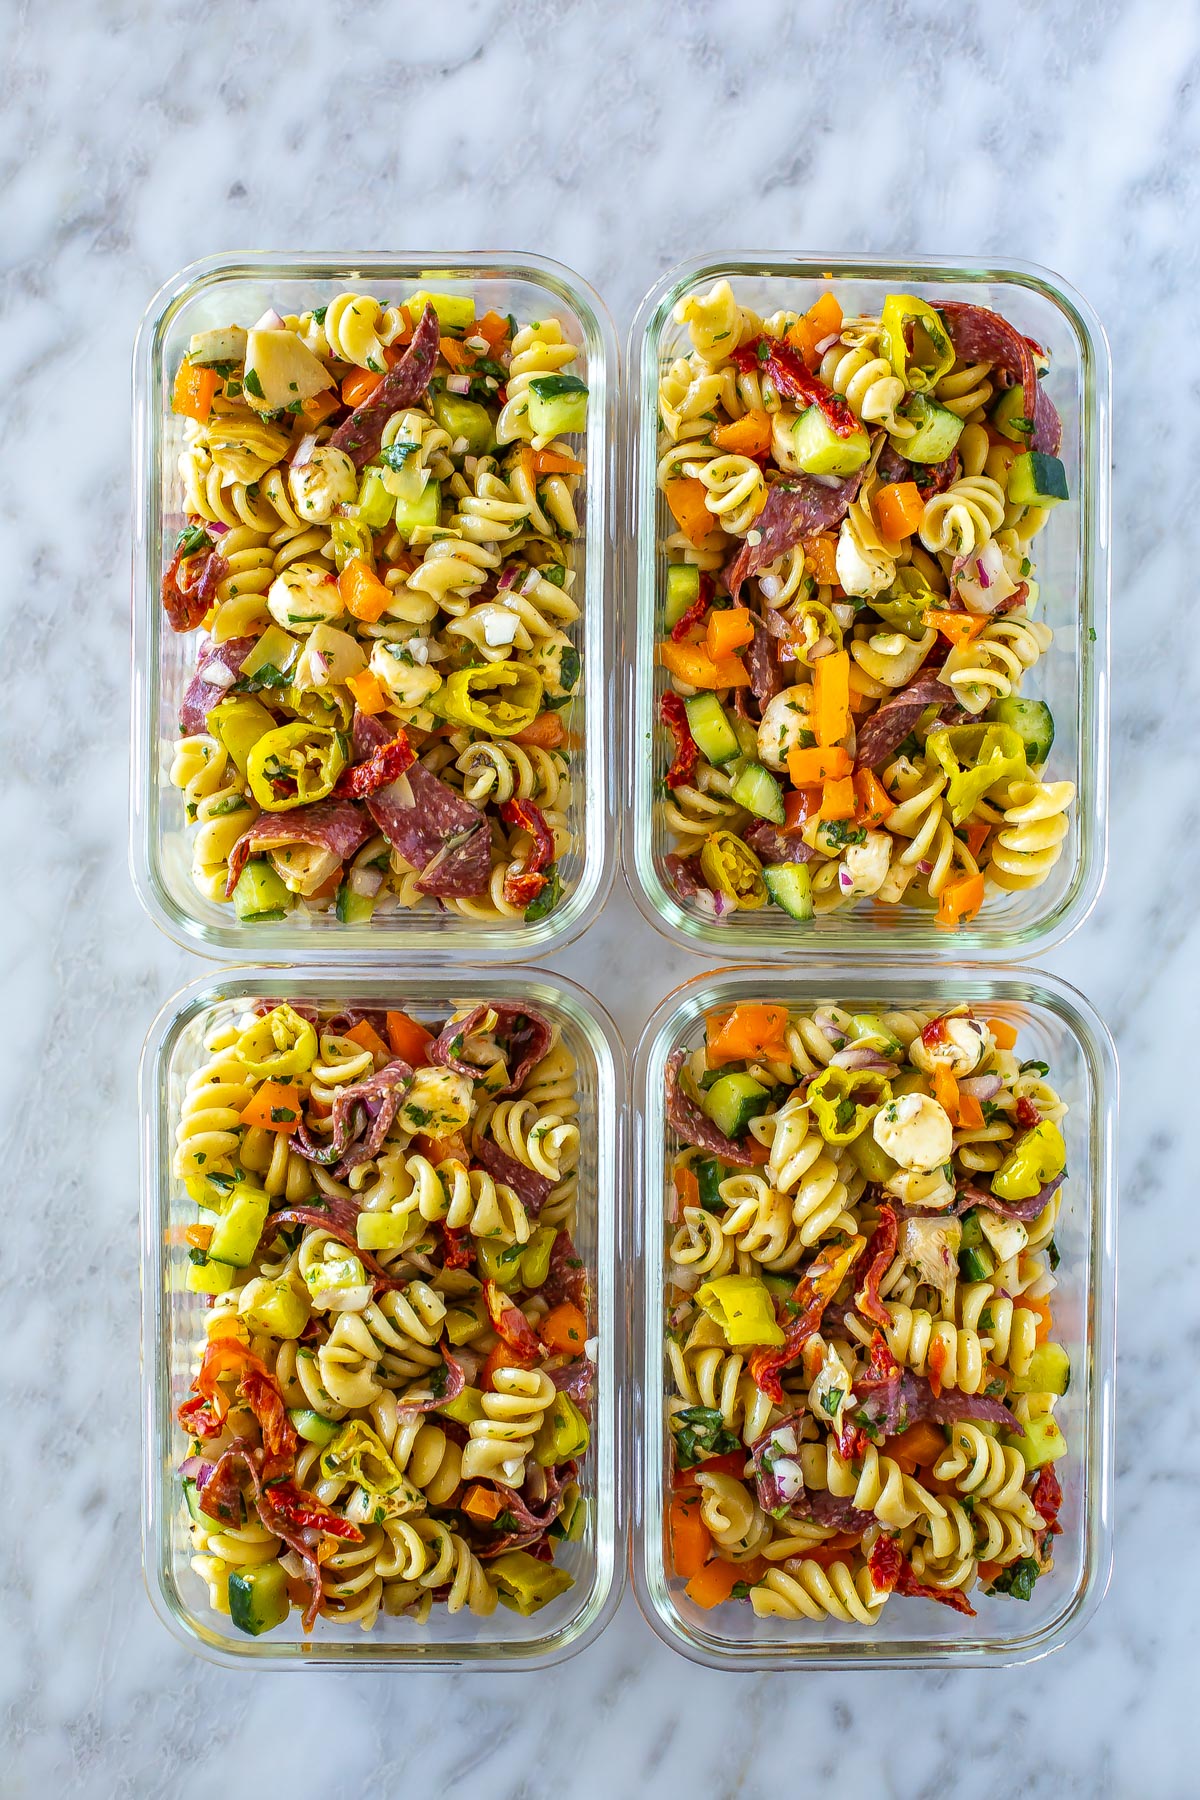 Four meal prep containers, each filled with Italian pasta salad.